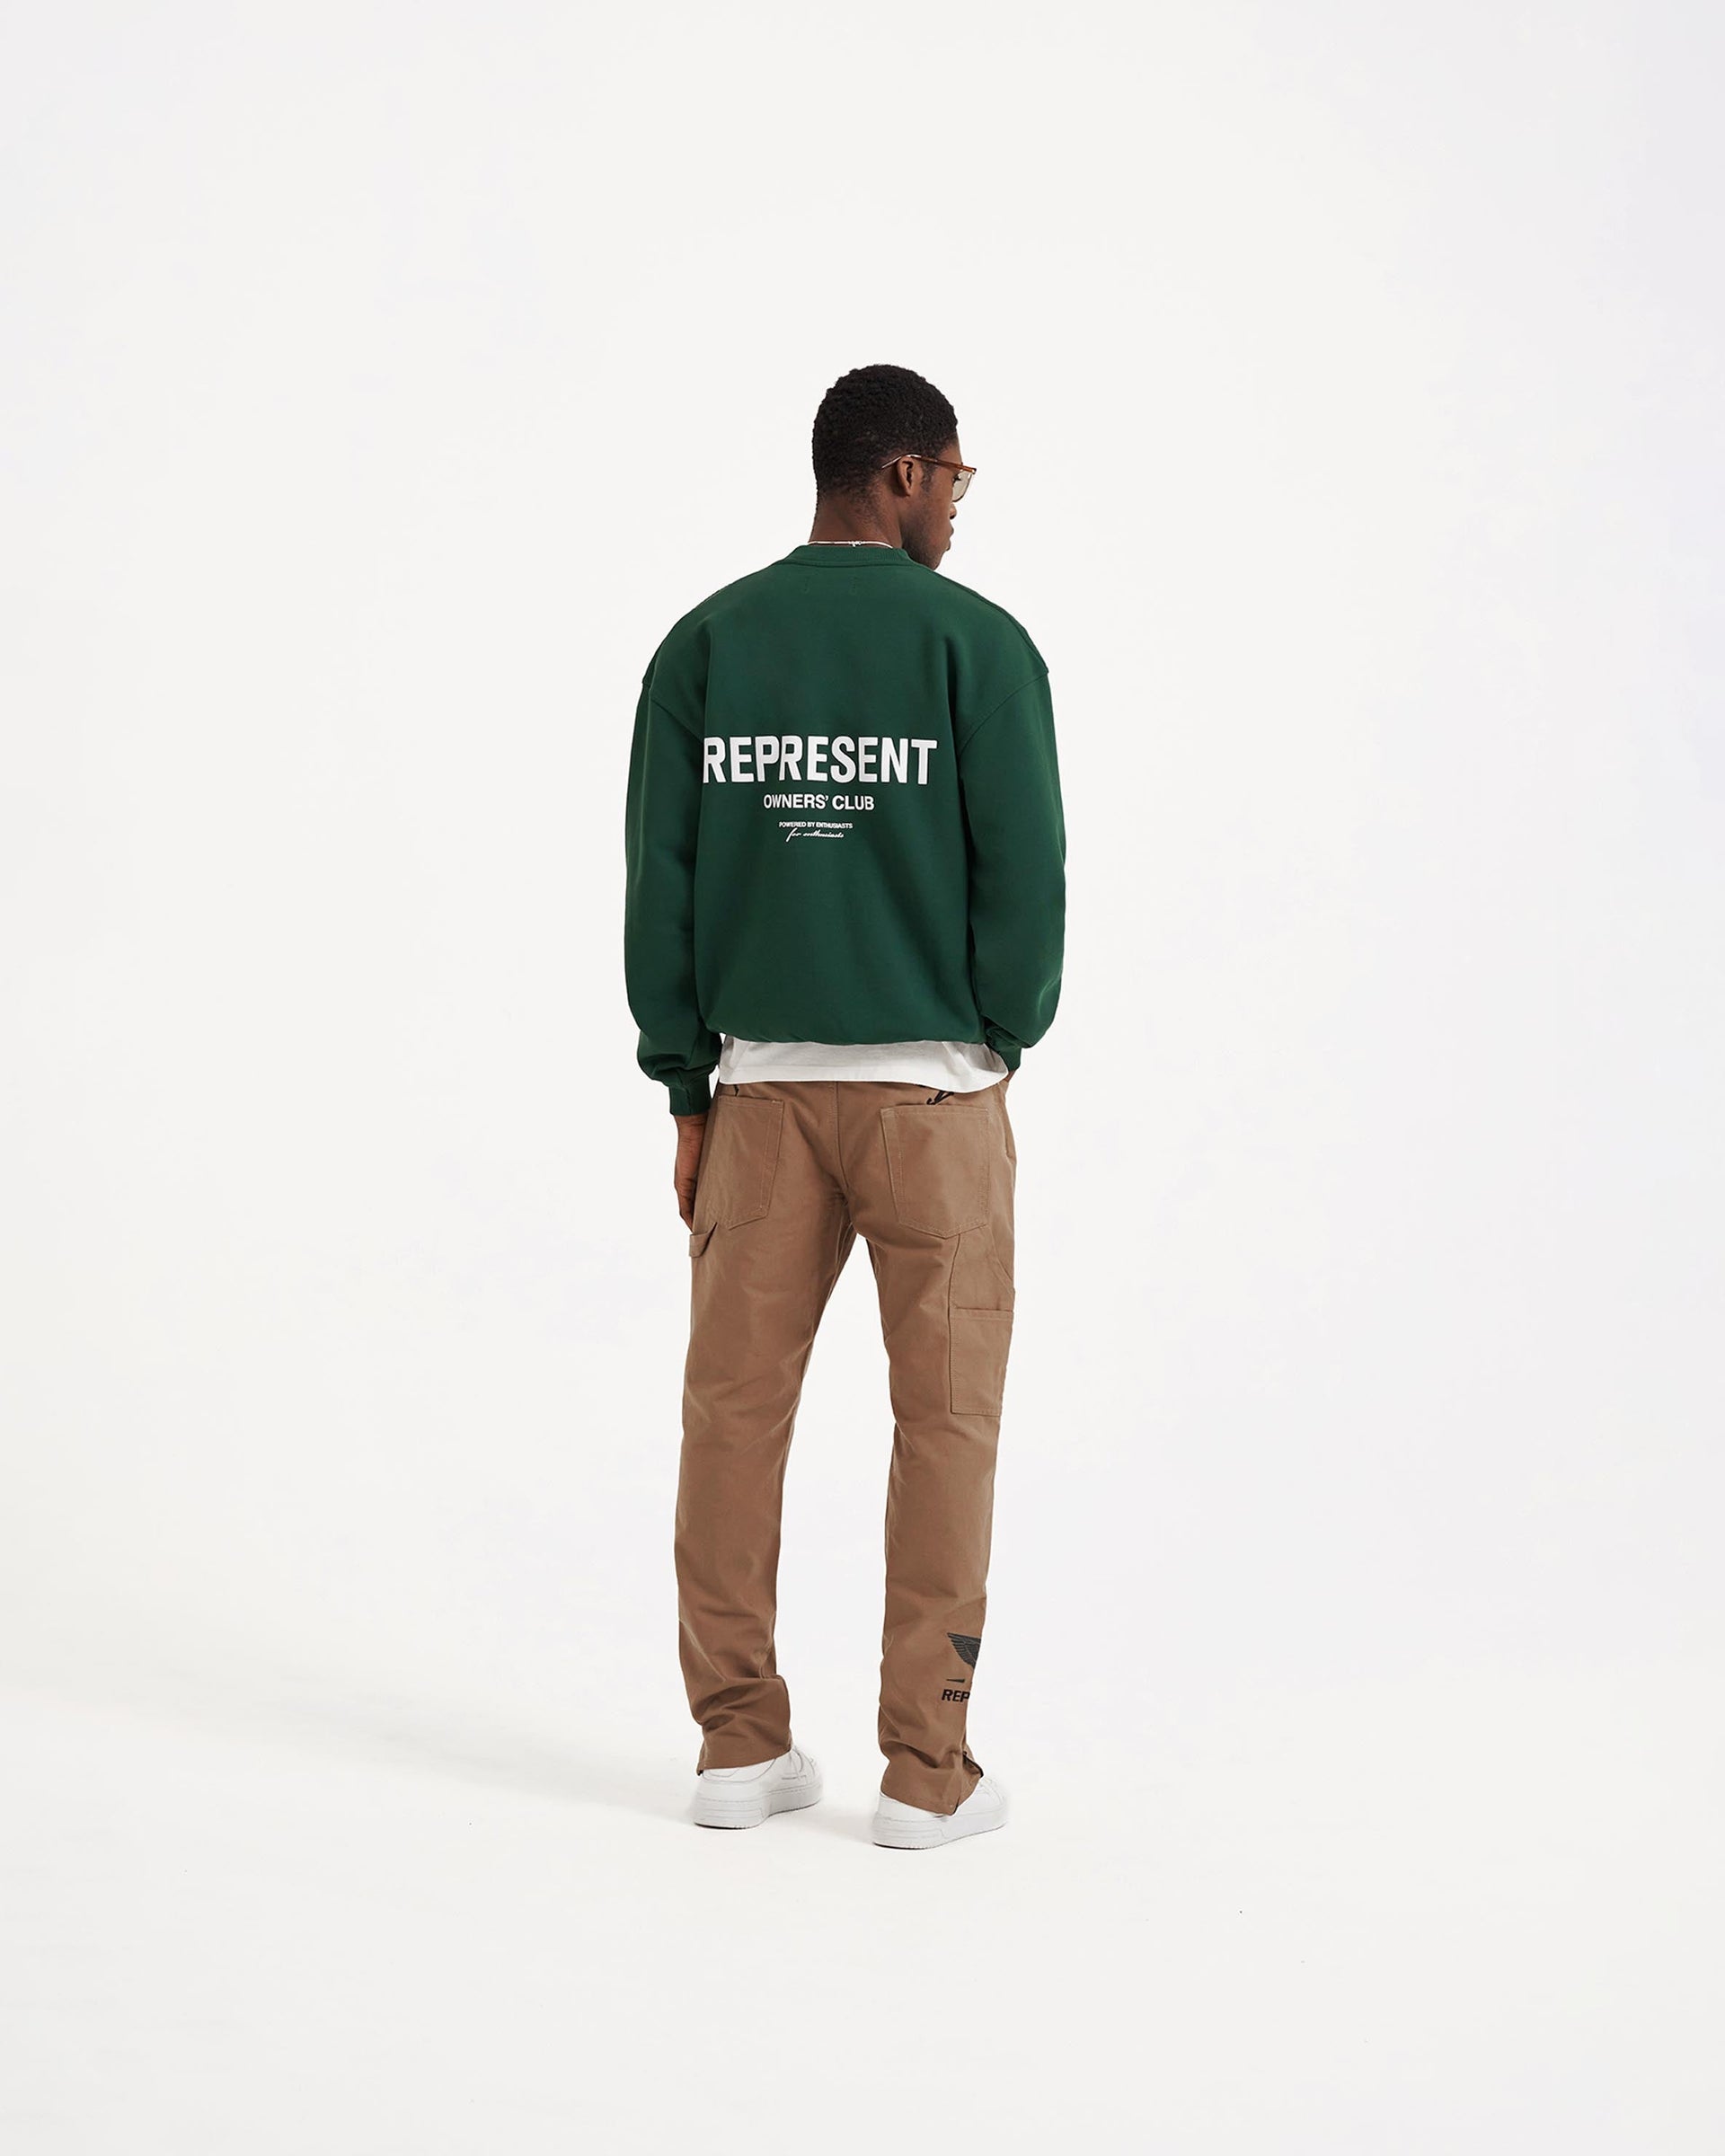 Racing Green Sweater | Owners Club | REPRESENT CLO